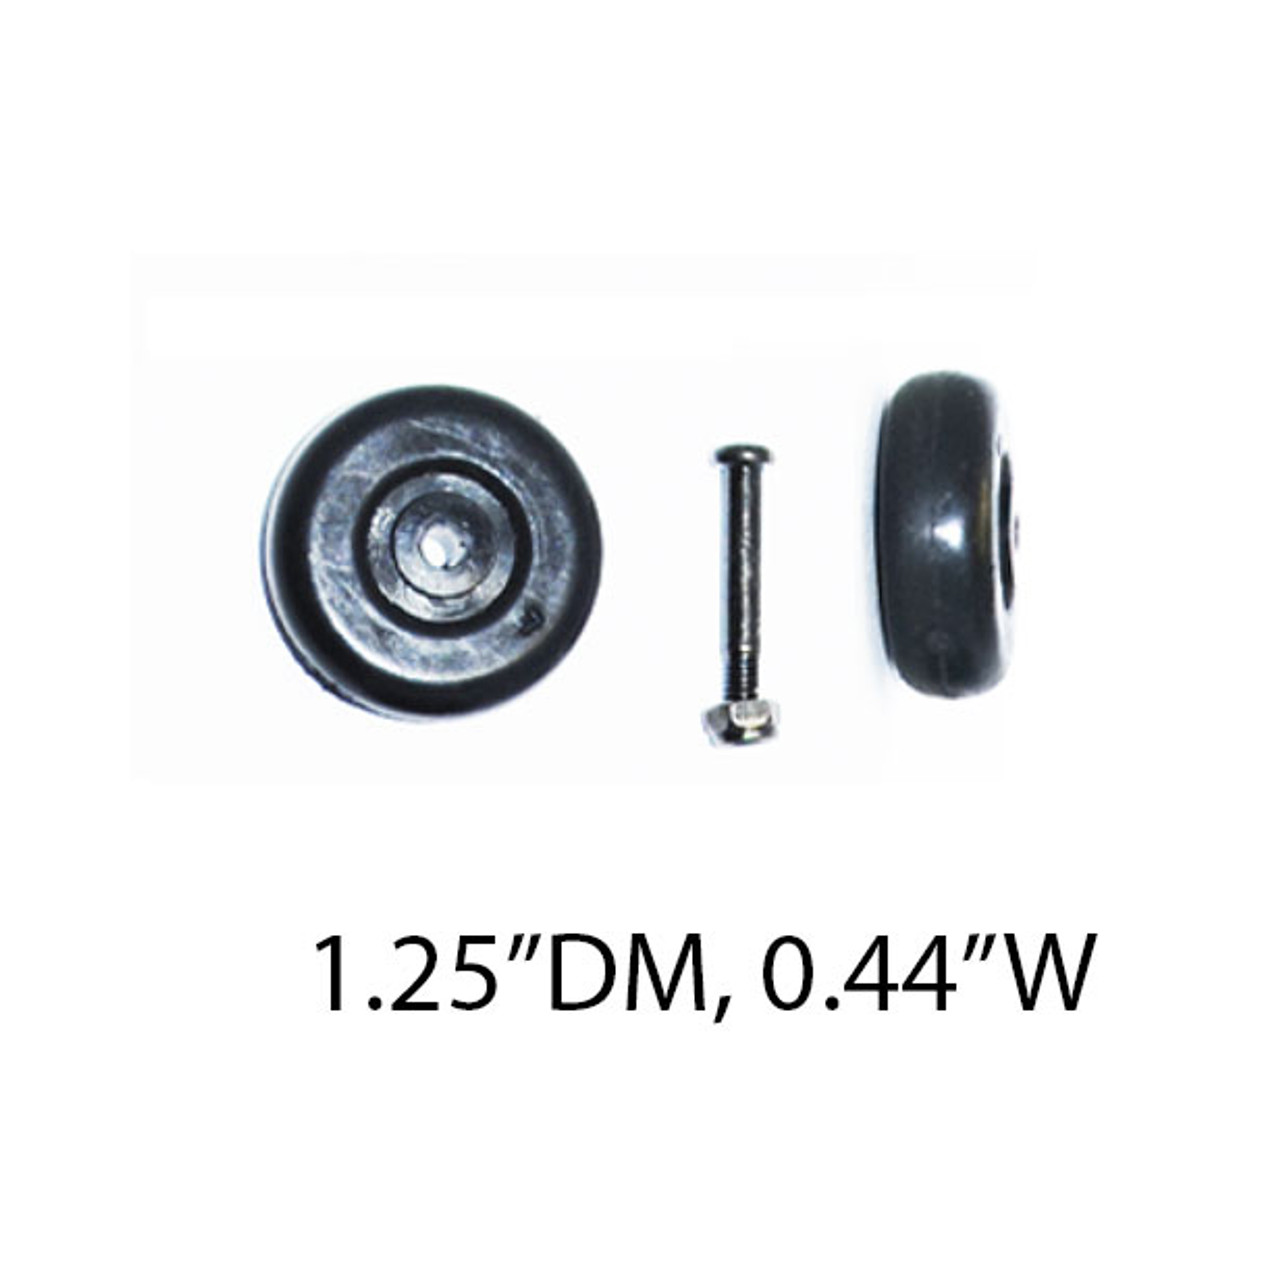 1. Front rotating wheels(1.25"DM, 0.44"W) / A quantity of 1 is 2 wheels